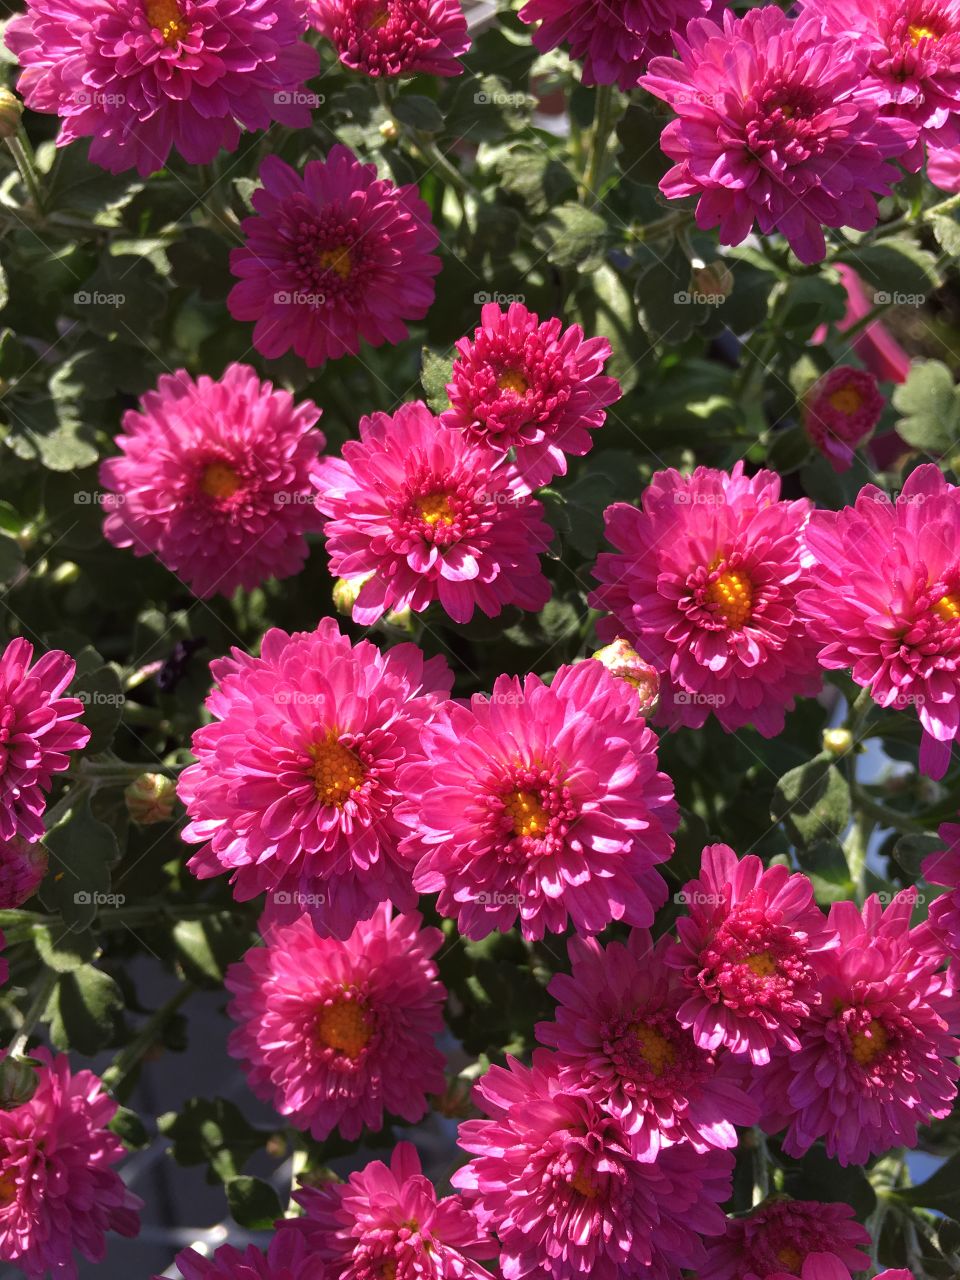 Bright pink asters